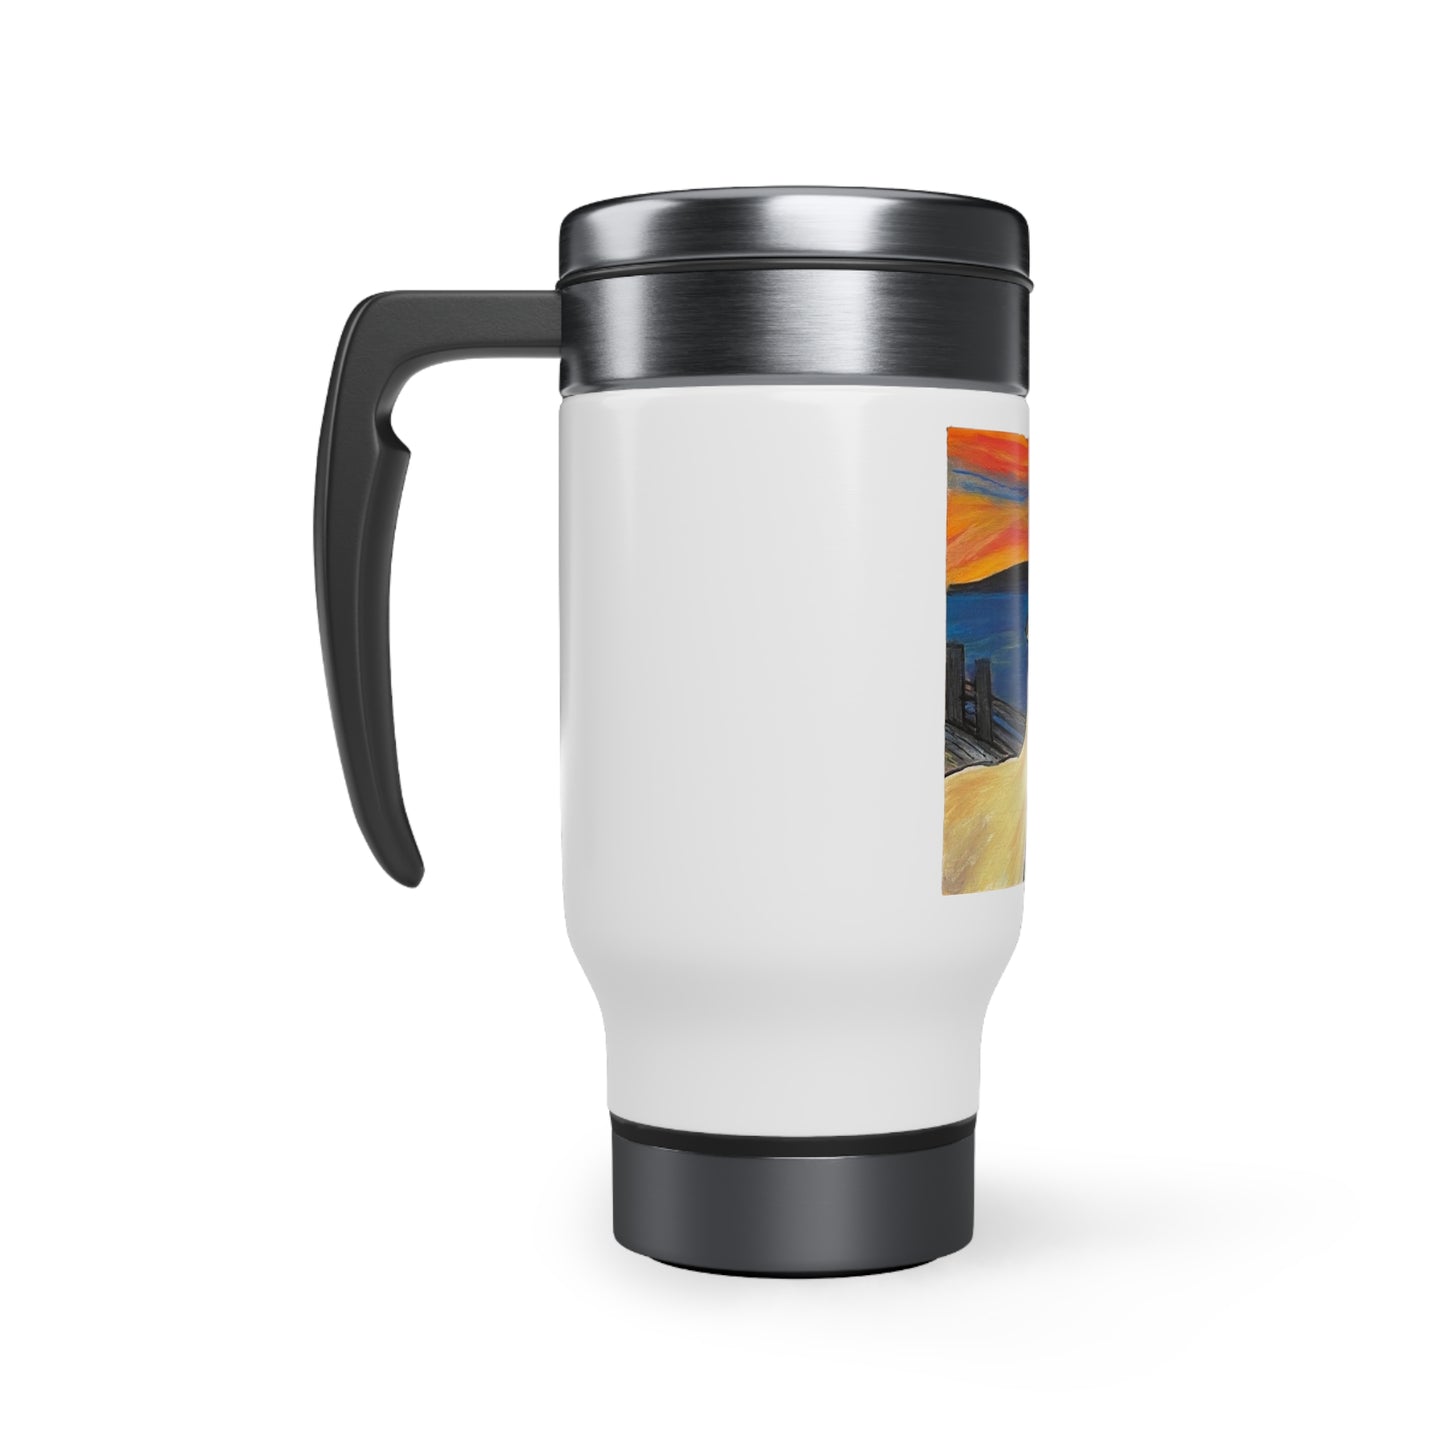 Holy Shit thats hot - Stainless Steel Travel Mug with Handle, 14oz